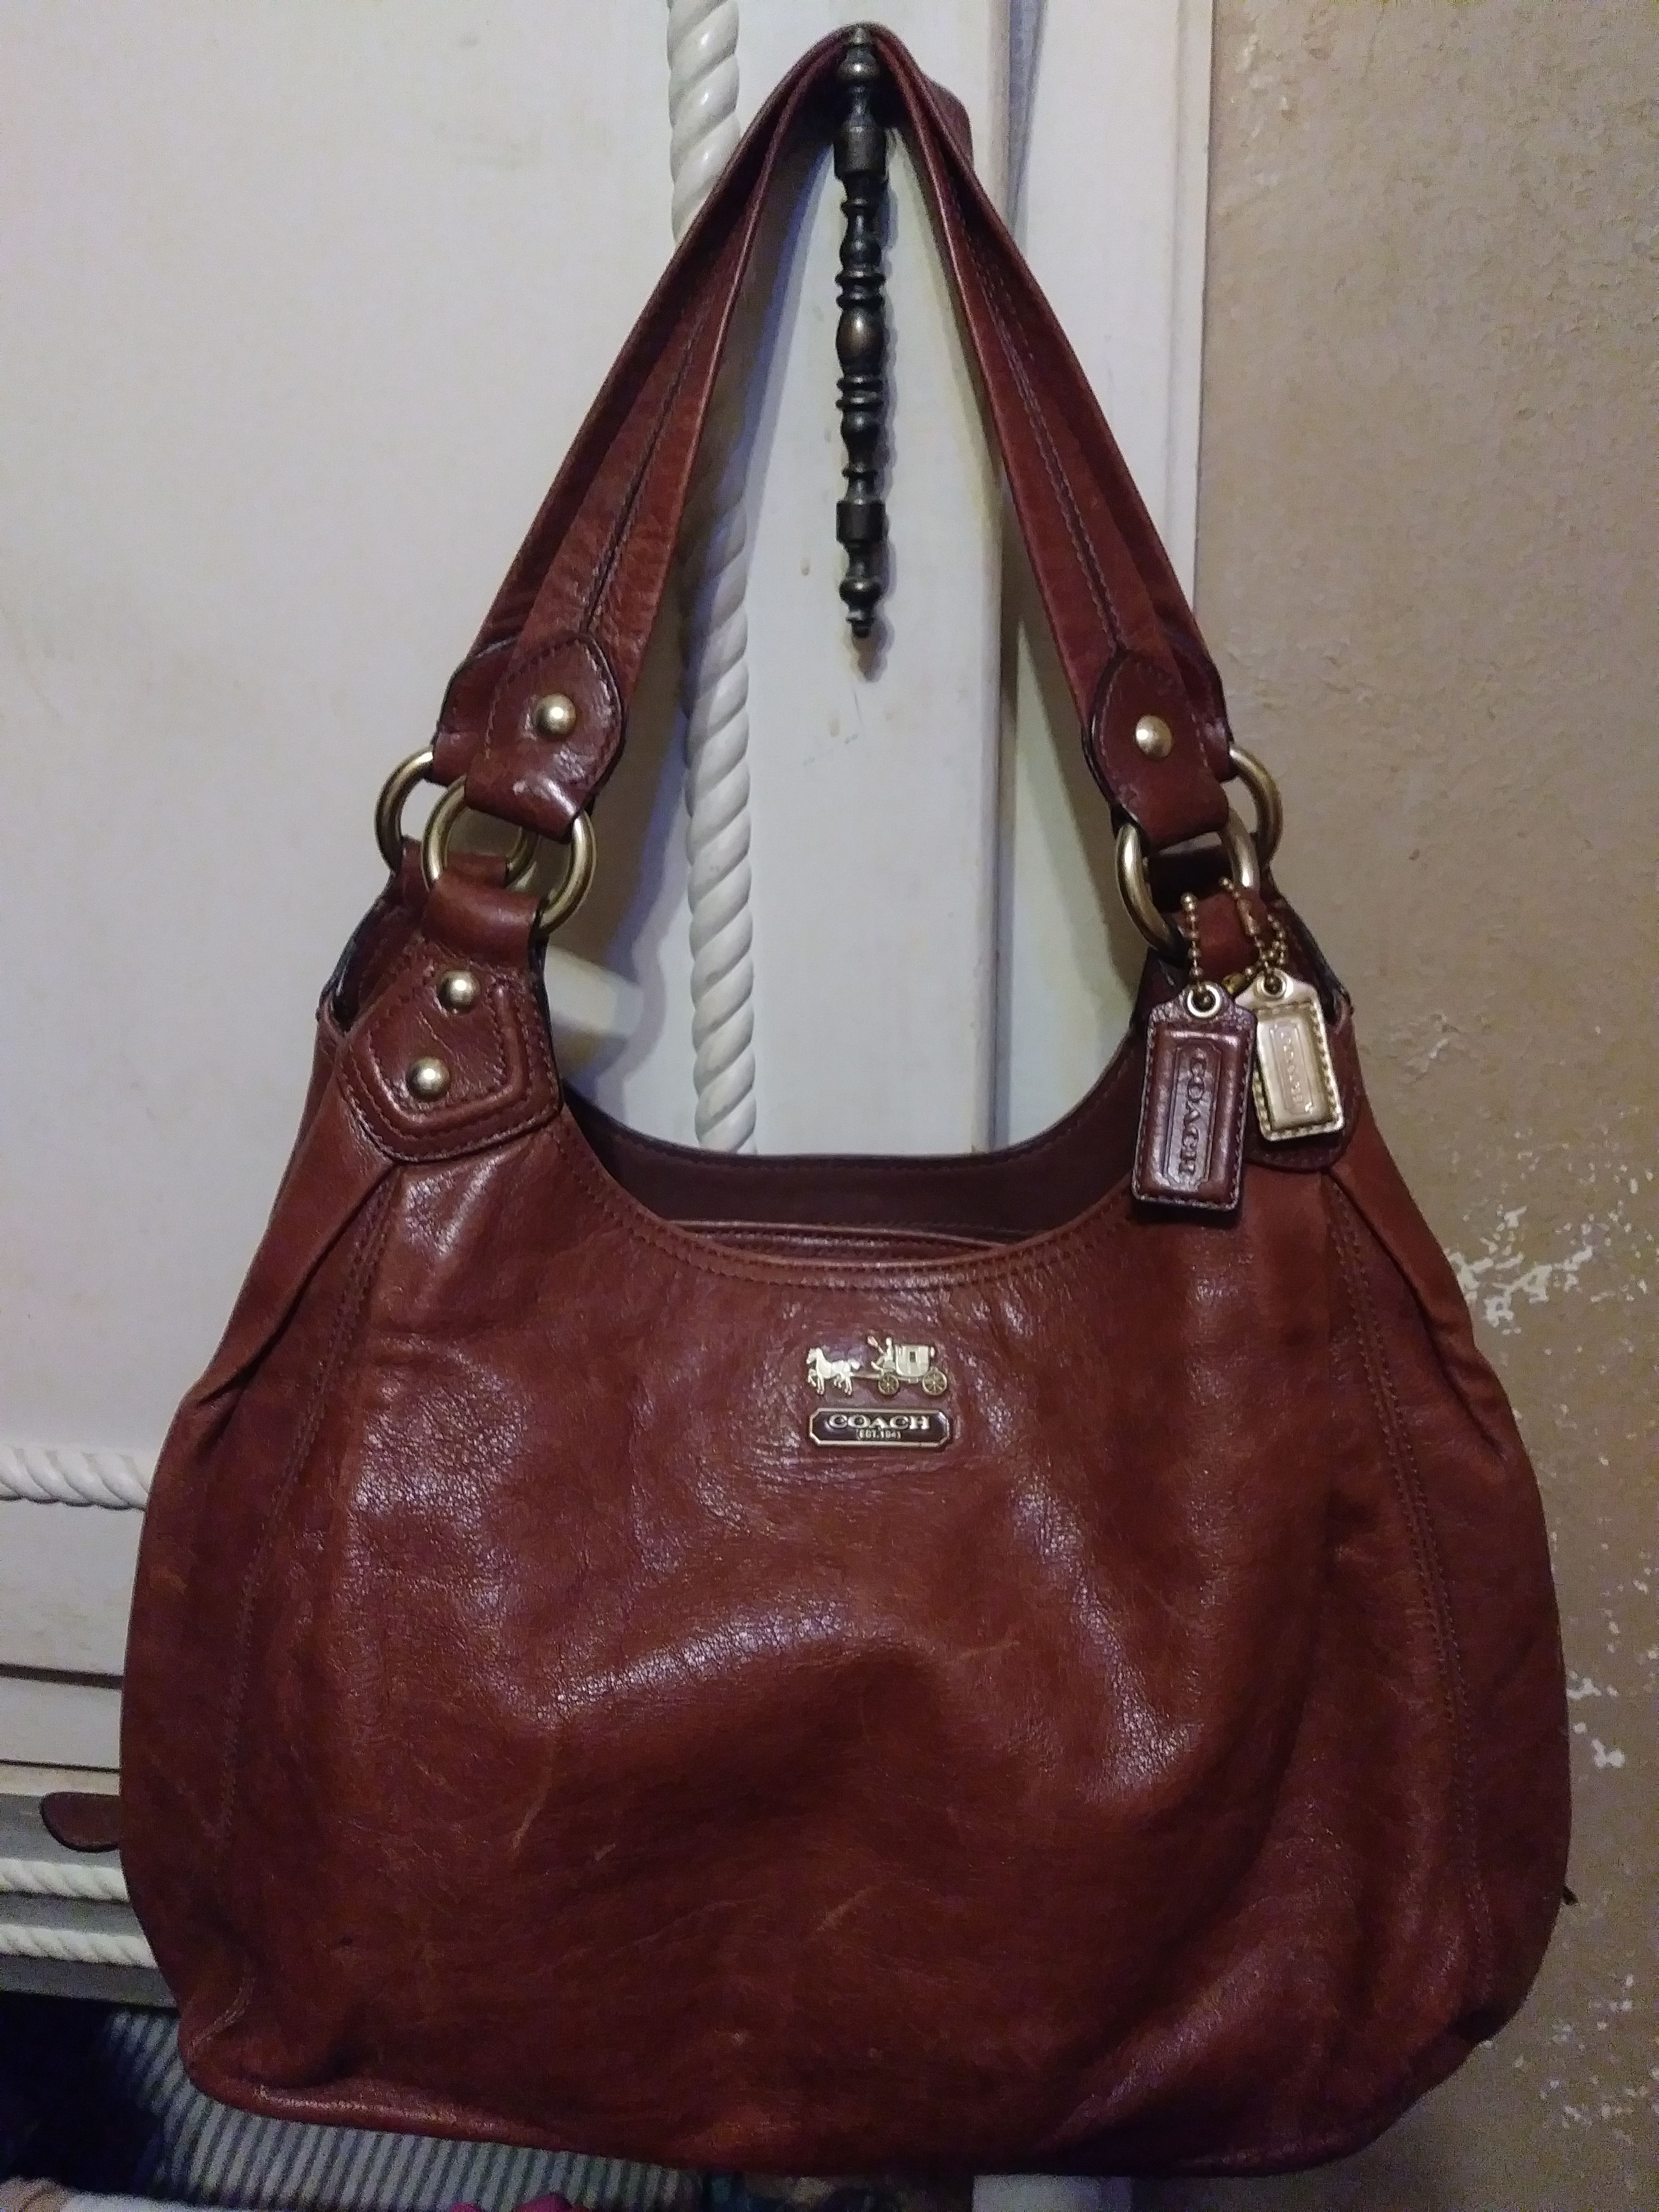 Coach - Authenticated Madison Handbag - Leather Brown Plain for Women, Very Good Condition